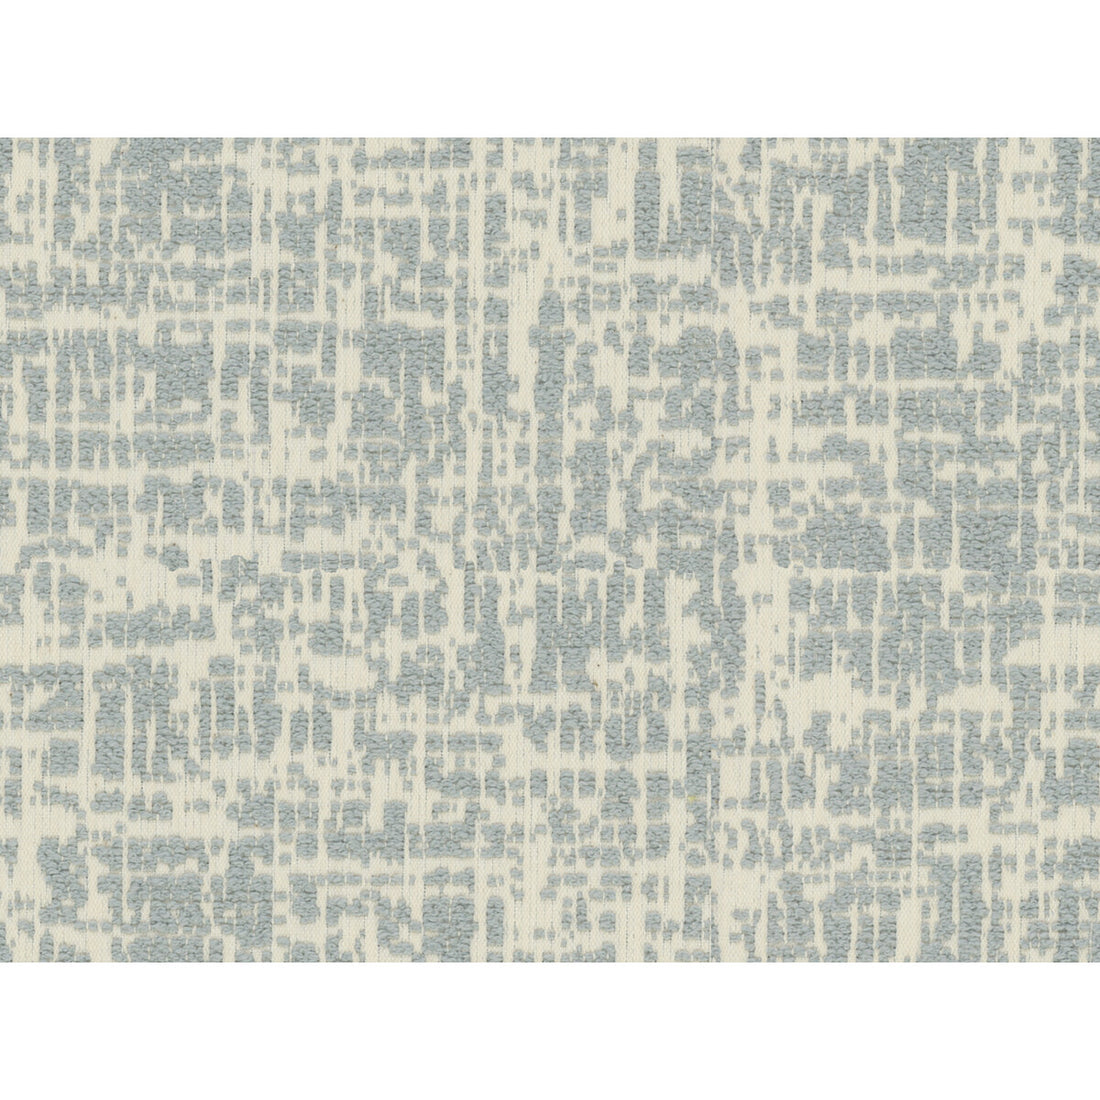 Art Scene fabric in glacier color - pattern 34442.1615.0 - by Kravet Couture